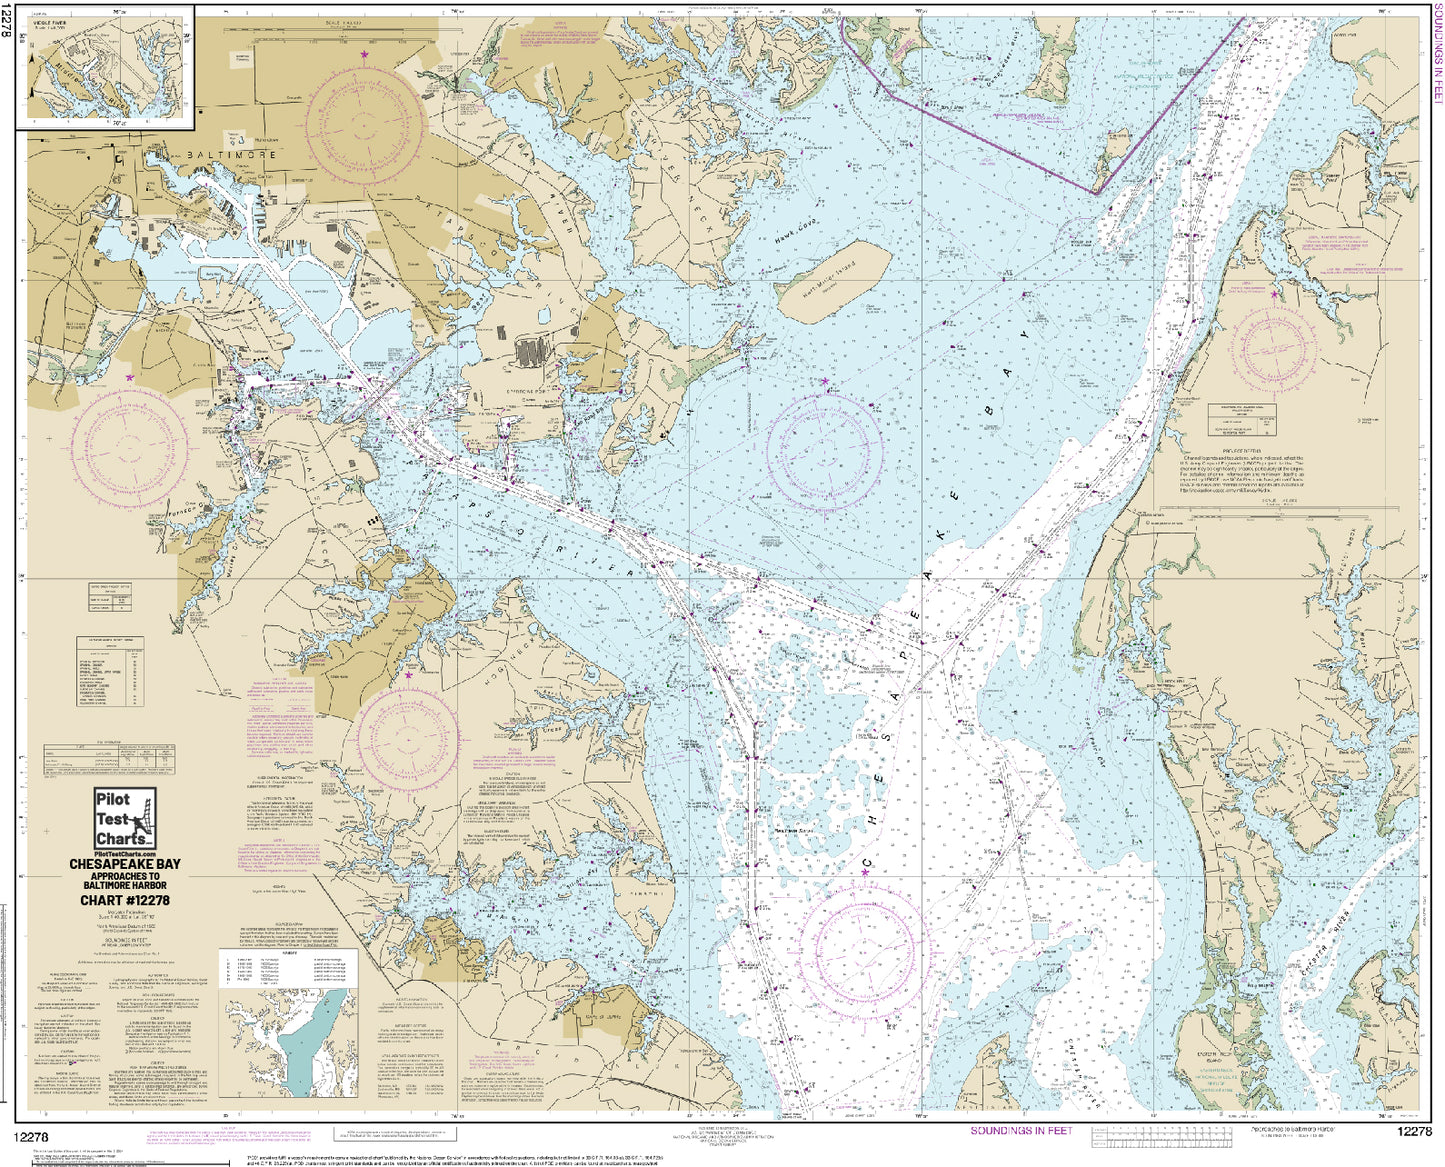 #12278 Chesapeake Bay, Approaches to Baltimore Harbor Chart